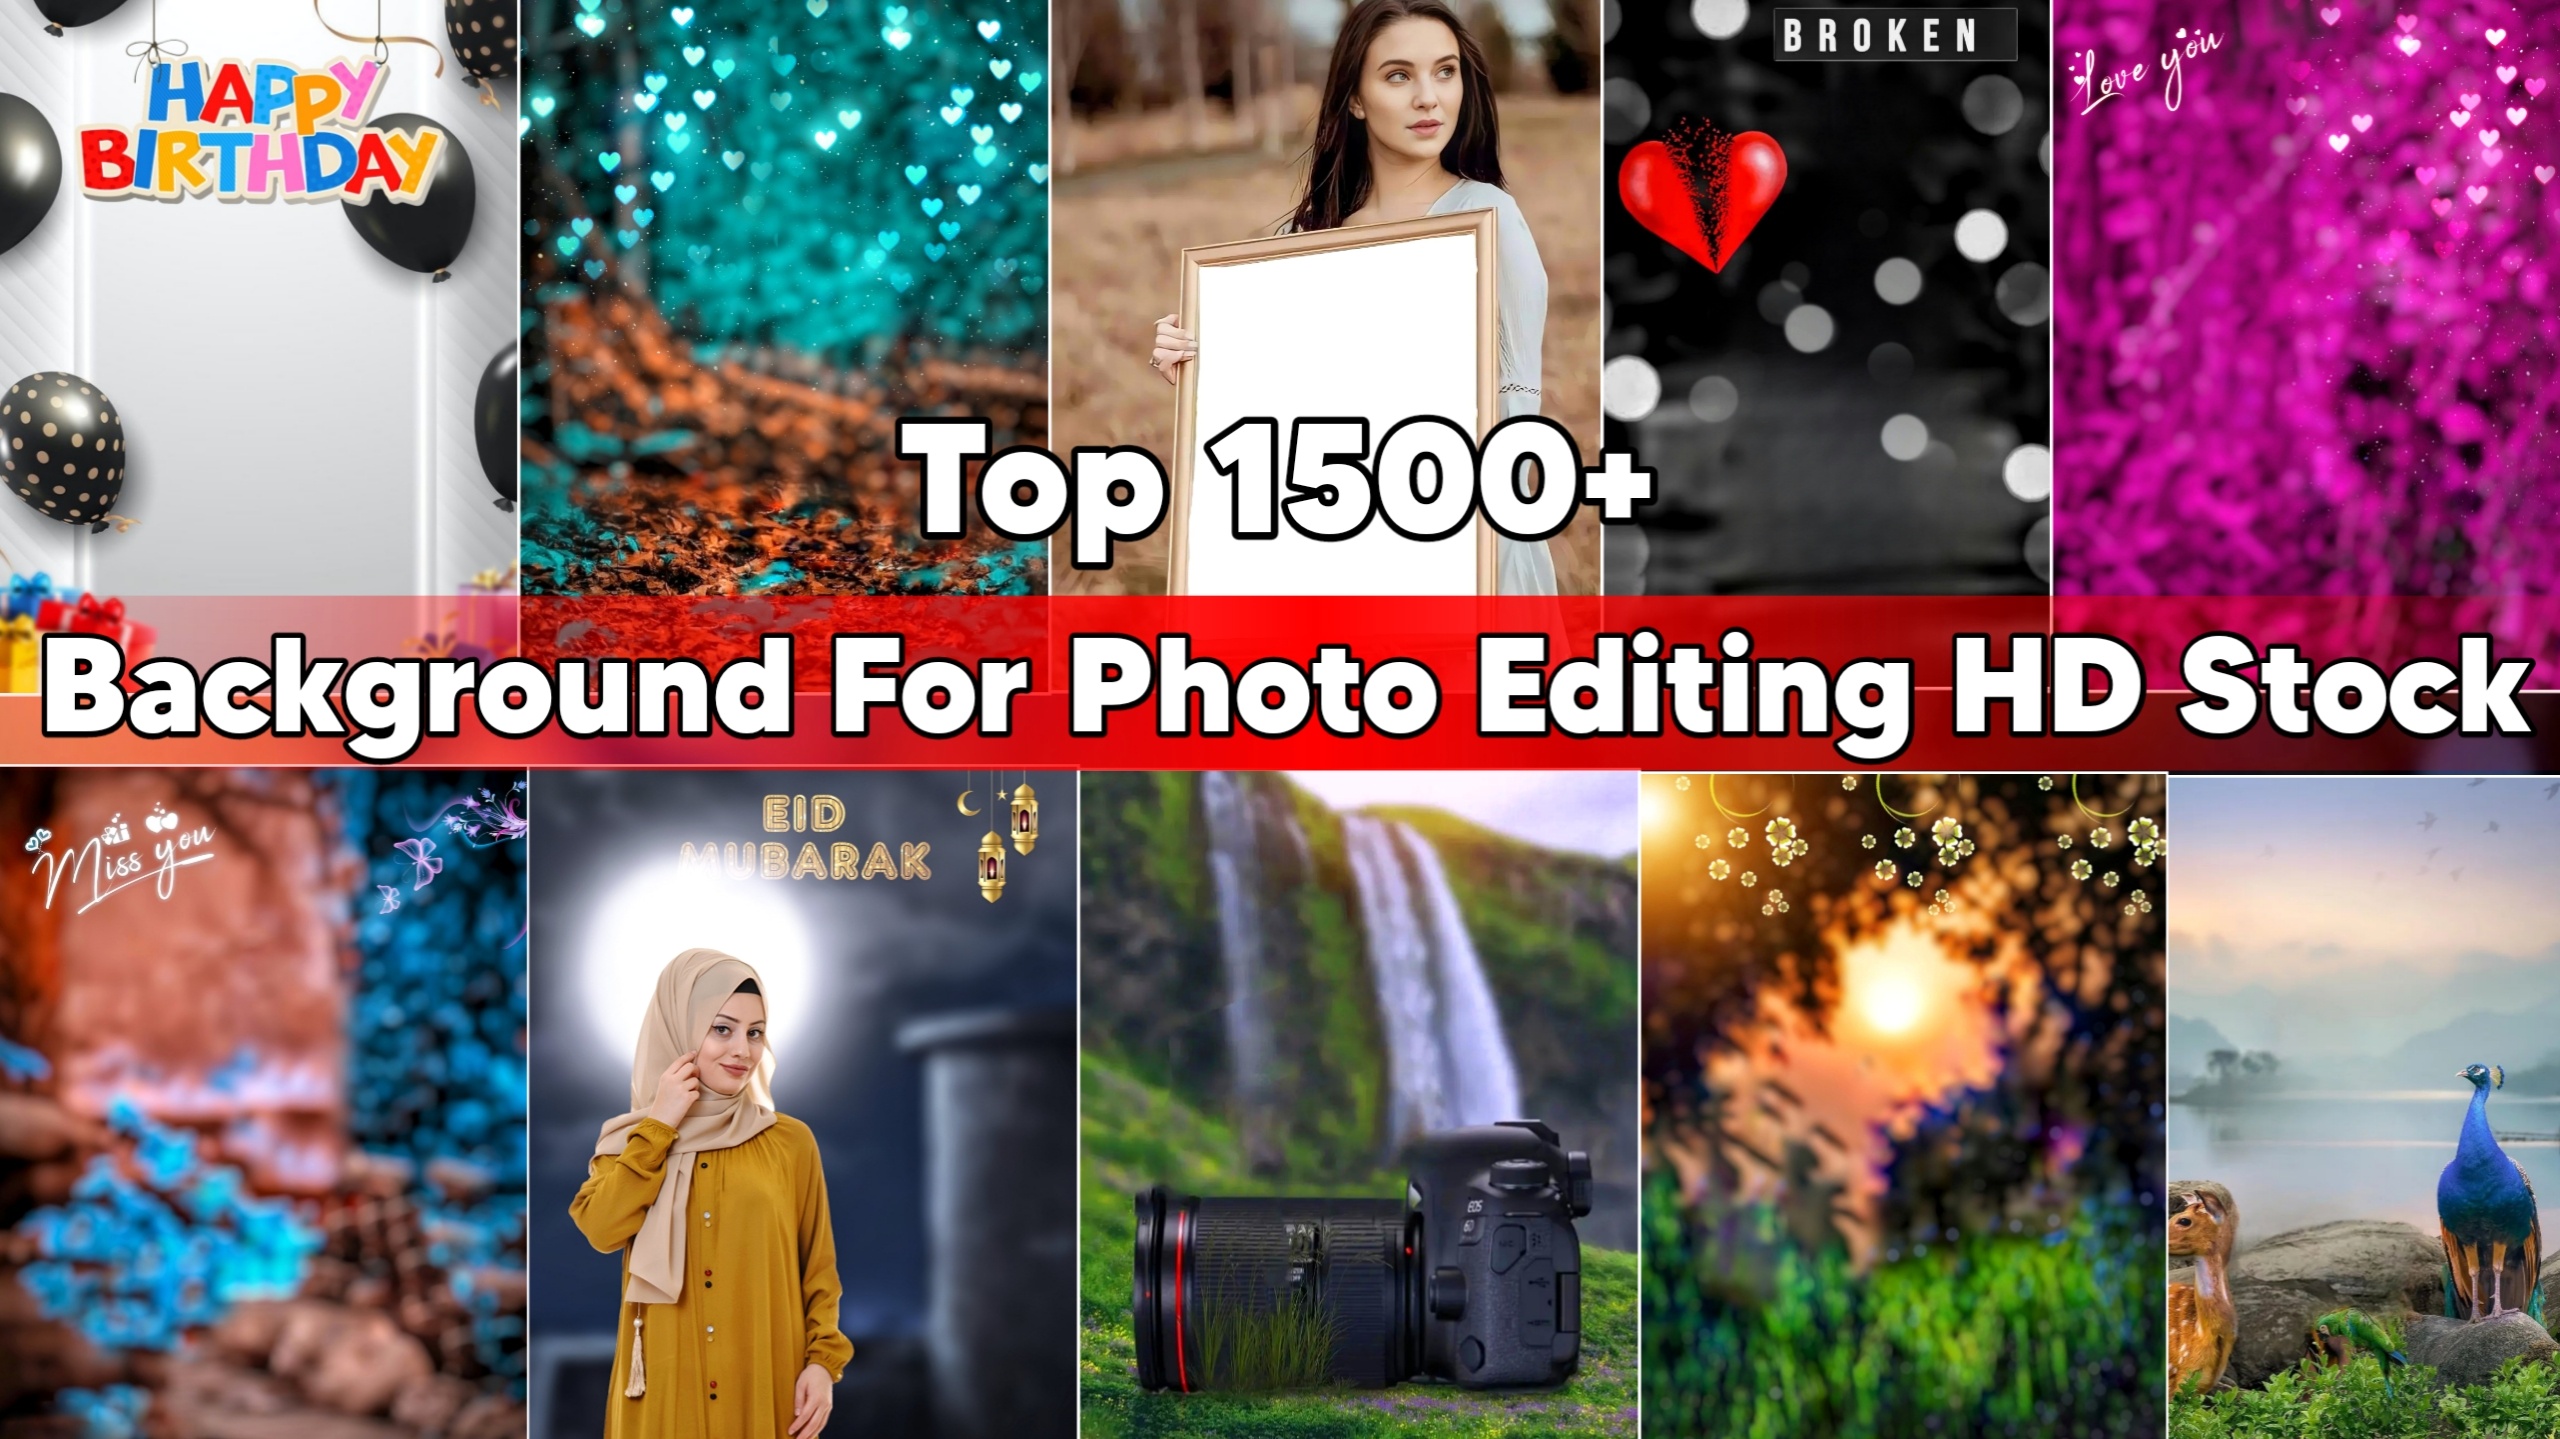 Top 1500+ Background For Photo Editing HD Stock